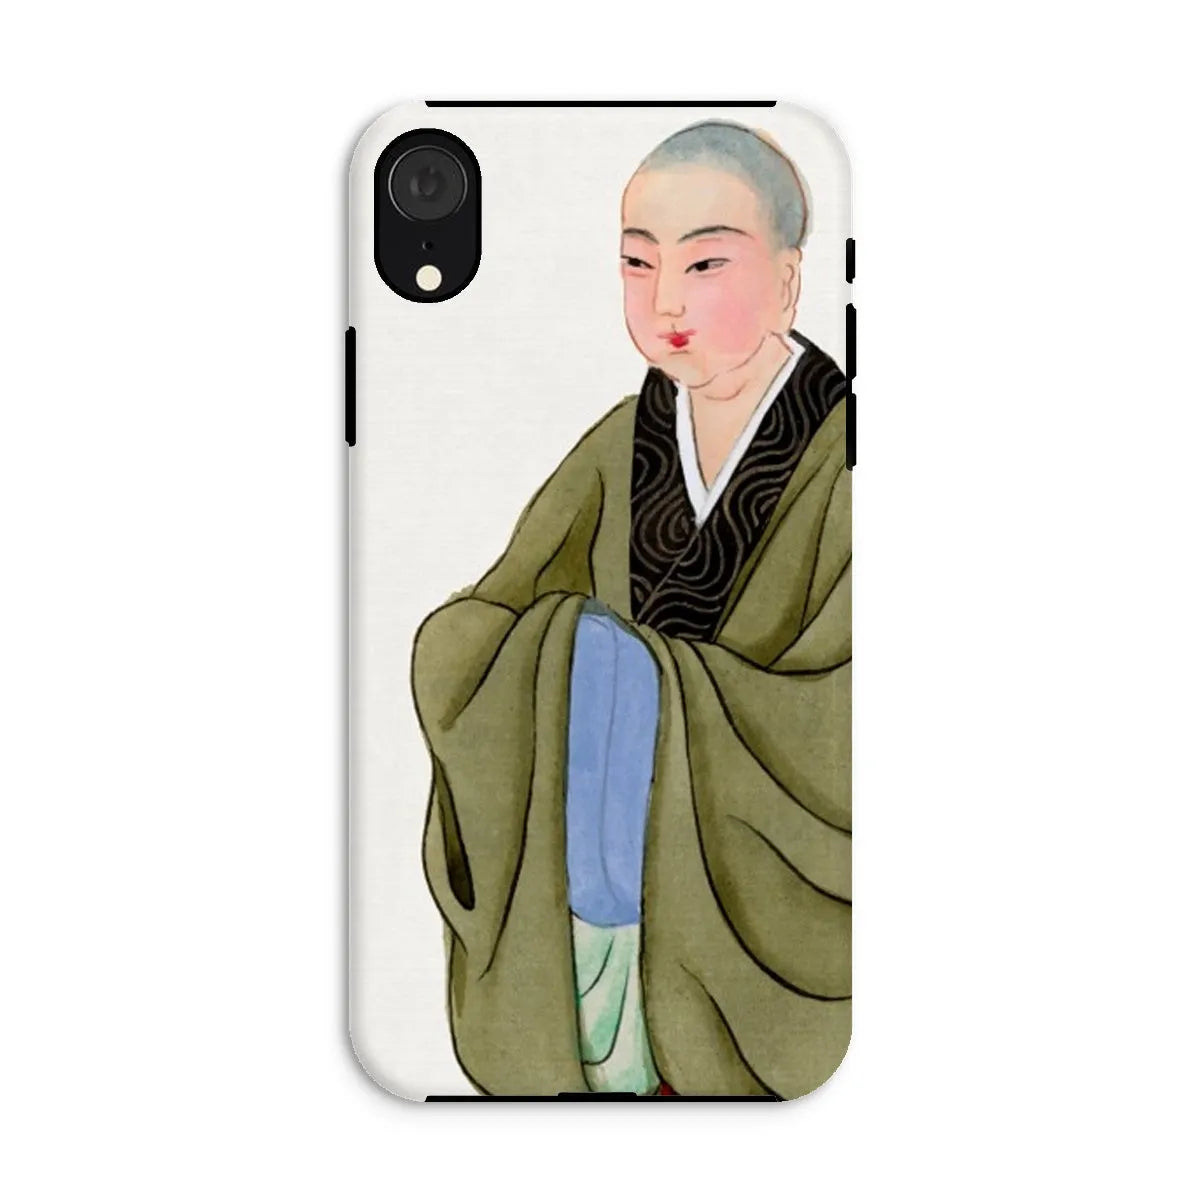 Buddhist Monk - Manchu Chinese Aesthetic Art Phone Case - Iphone Xr / Matte - Mobile Phone Cases - Aesthetic Art